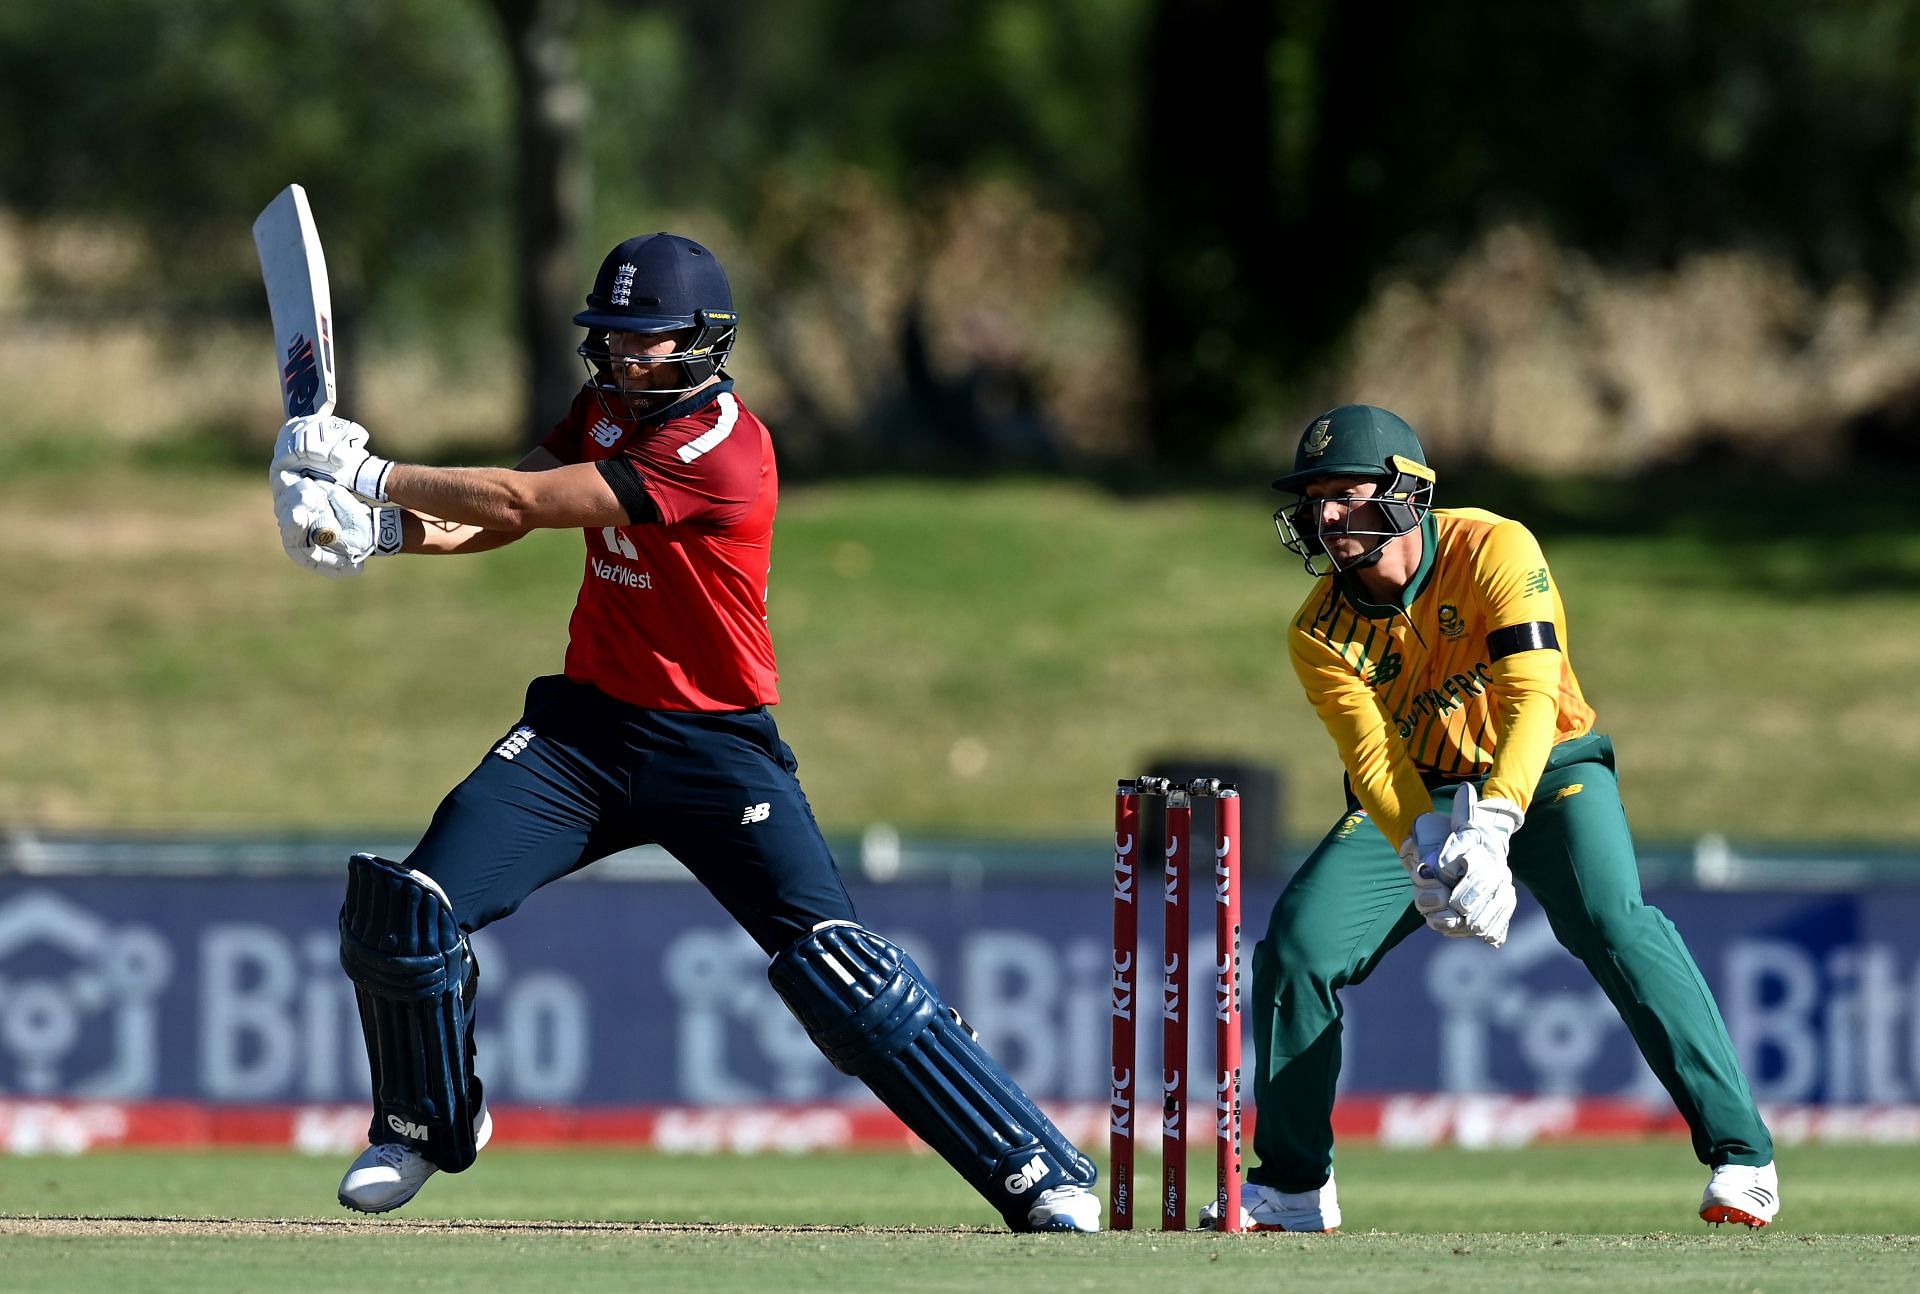 Dawid Malan and Quinton de Kock will play an important role in the England vs South Africa T20 World Cup match